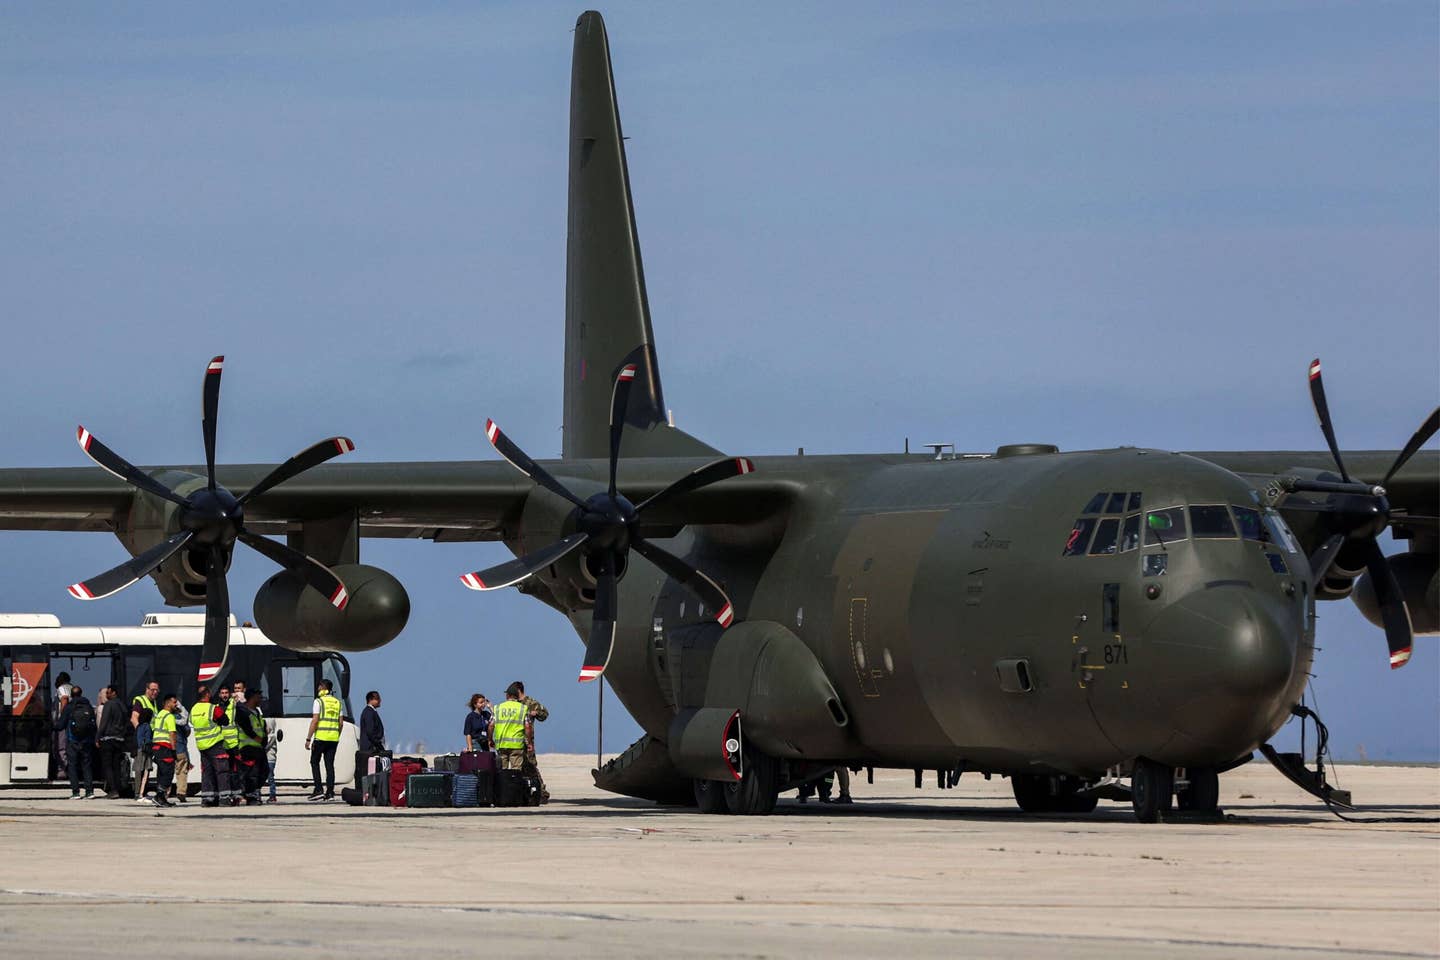 A British Royal Air Force C-130 Hercules military transport that was carrying evacuees from Sudan is pictured on the tarmac at Larnaca International Airport in Cyprus on April 26, 2023. <em>Photo by CHRISTINA ASSI/AFP via Getty Images</em>